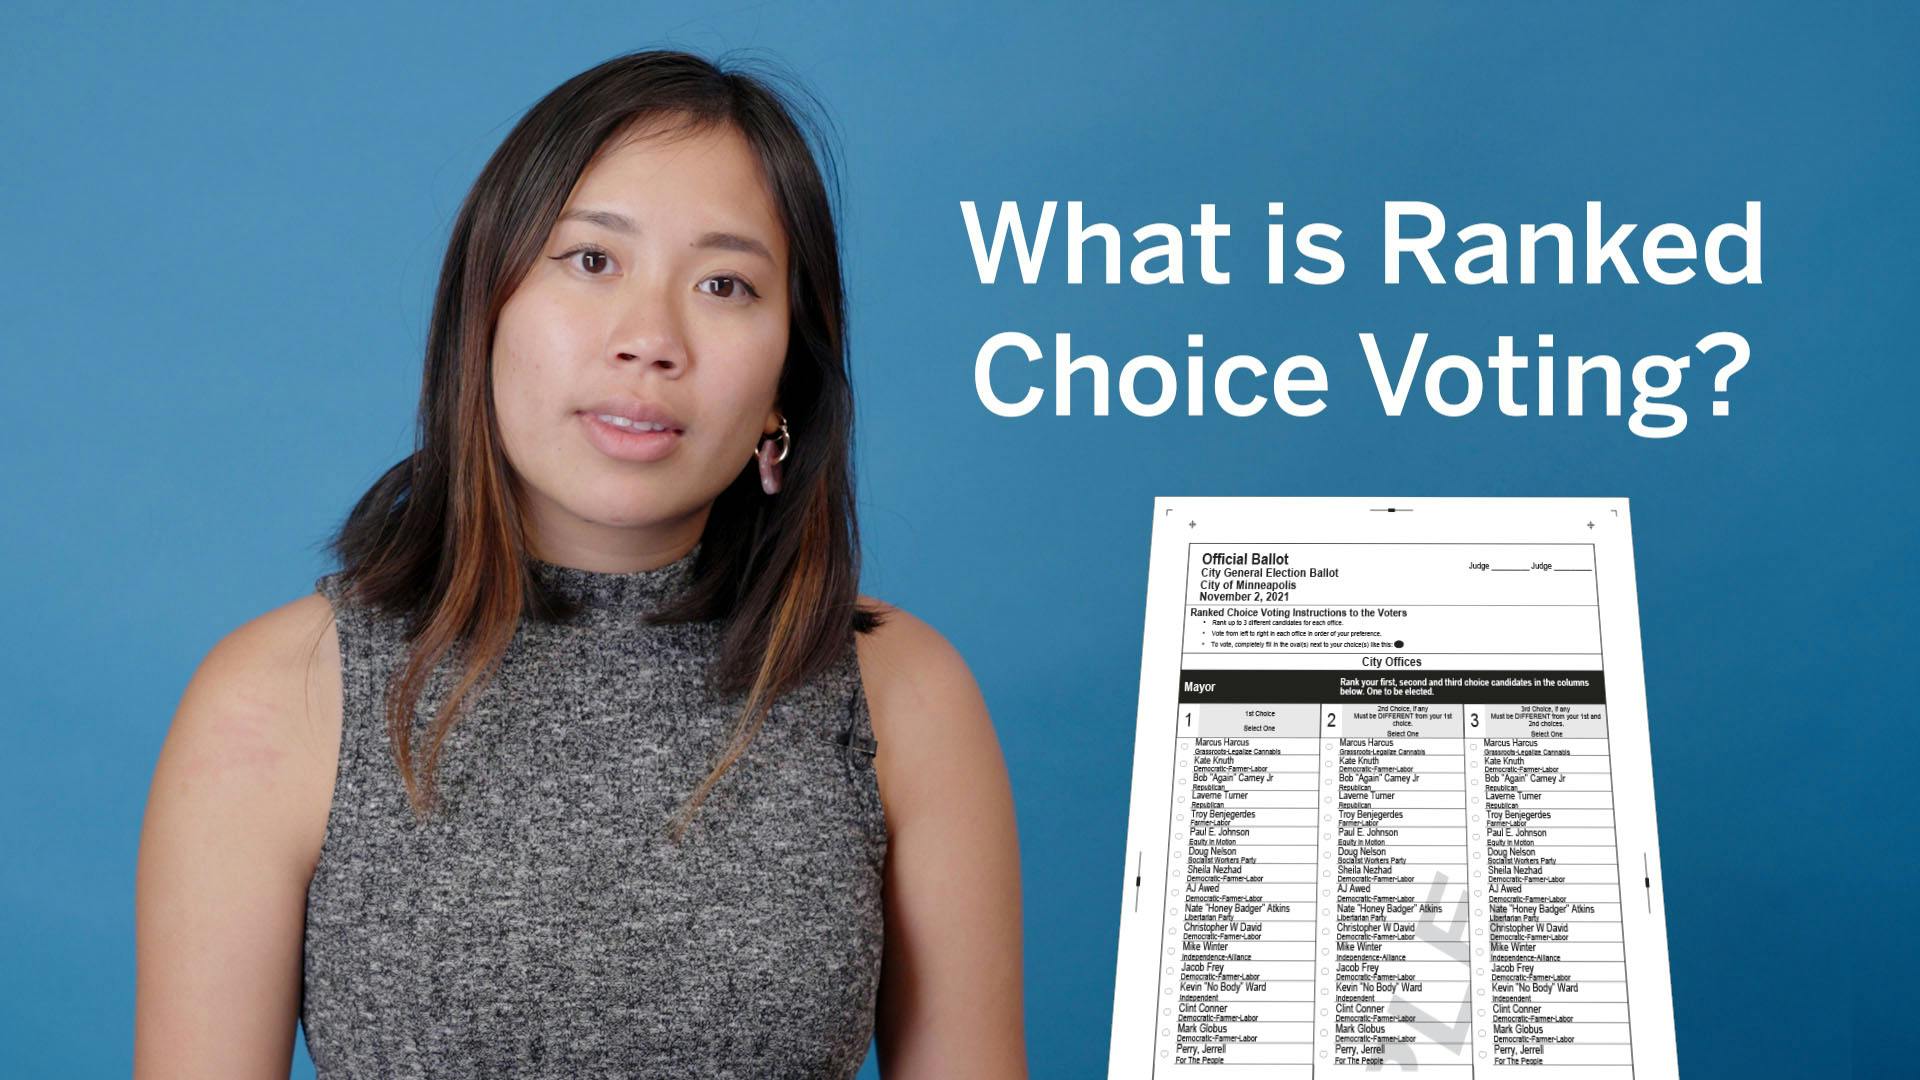 Residents of Minneapolis, St. Paul and several suburbs will have at least one rank choice election on their ballots this November. But how does ranked choice voting work, and what does it mean for our elections?